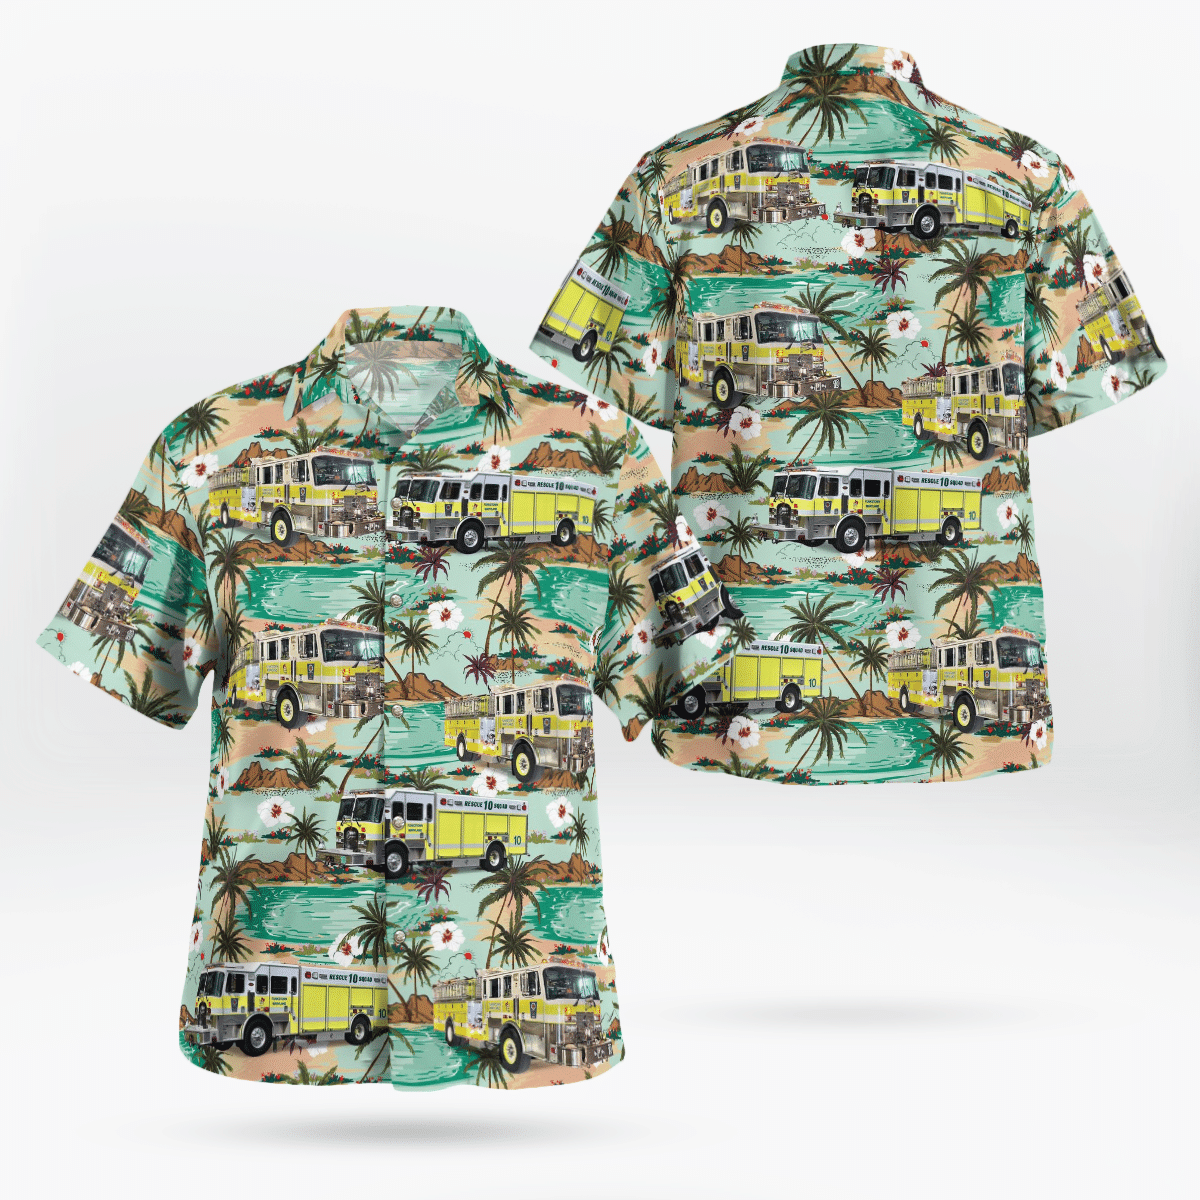 If you are in need of a new summertime look, pick up this Hawaiian shirt 77